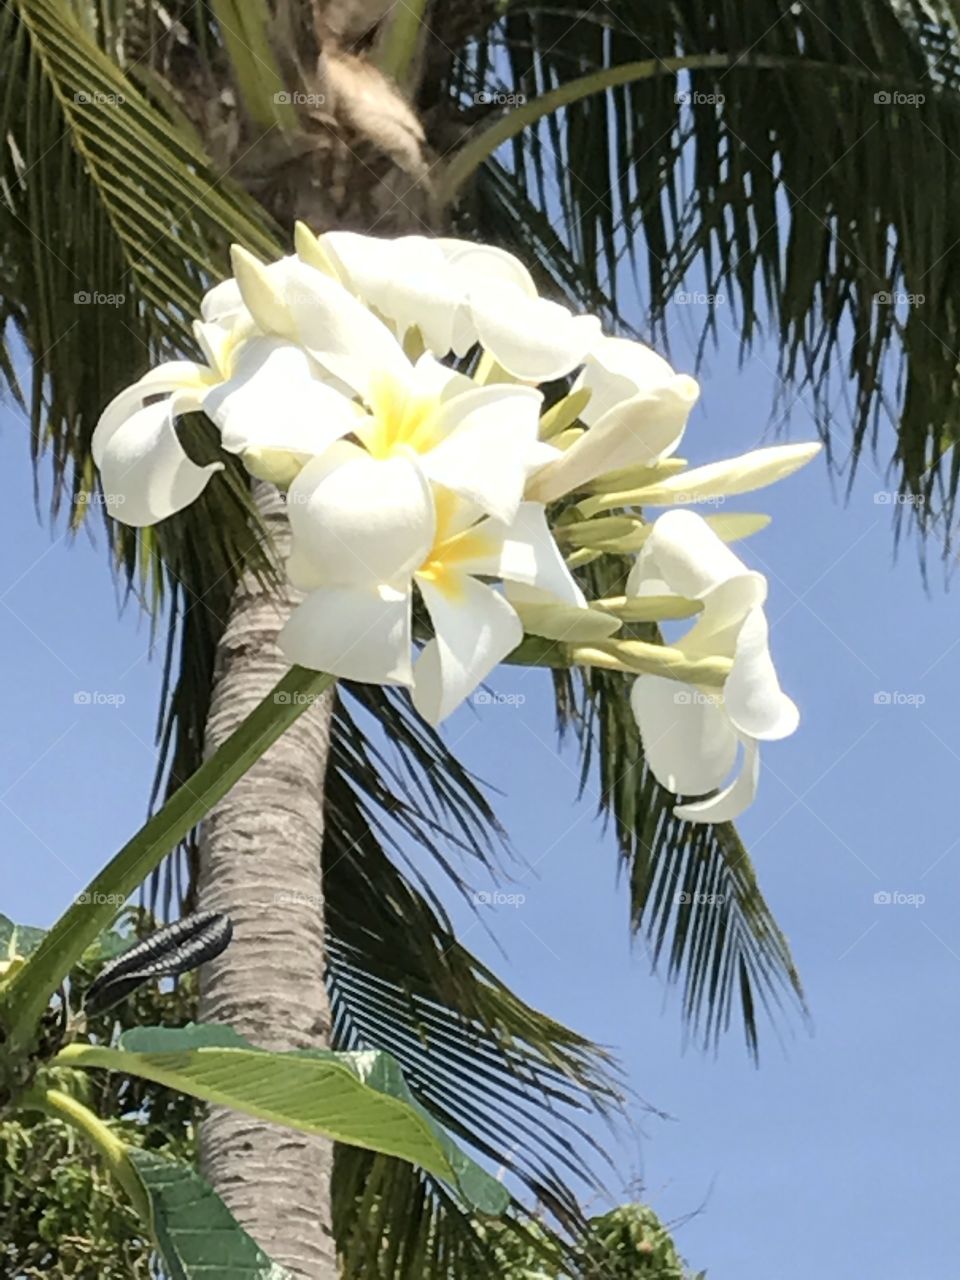 Buds & flowers of Tropical white flower 